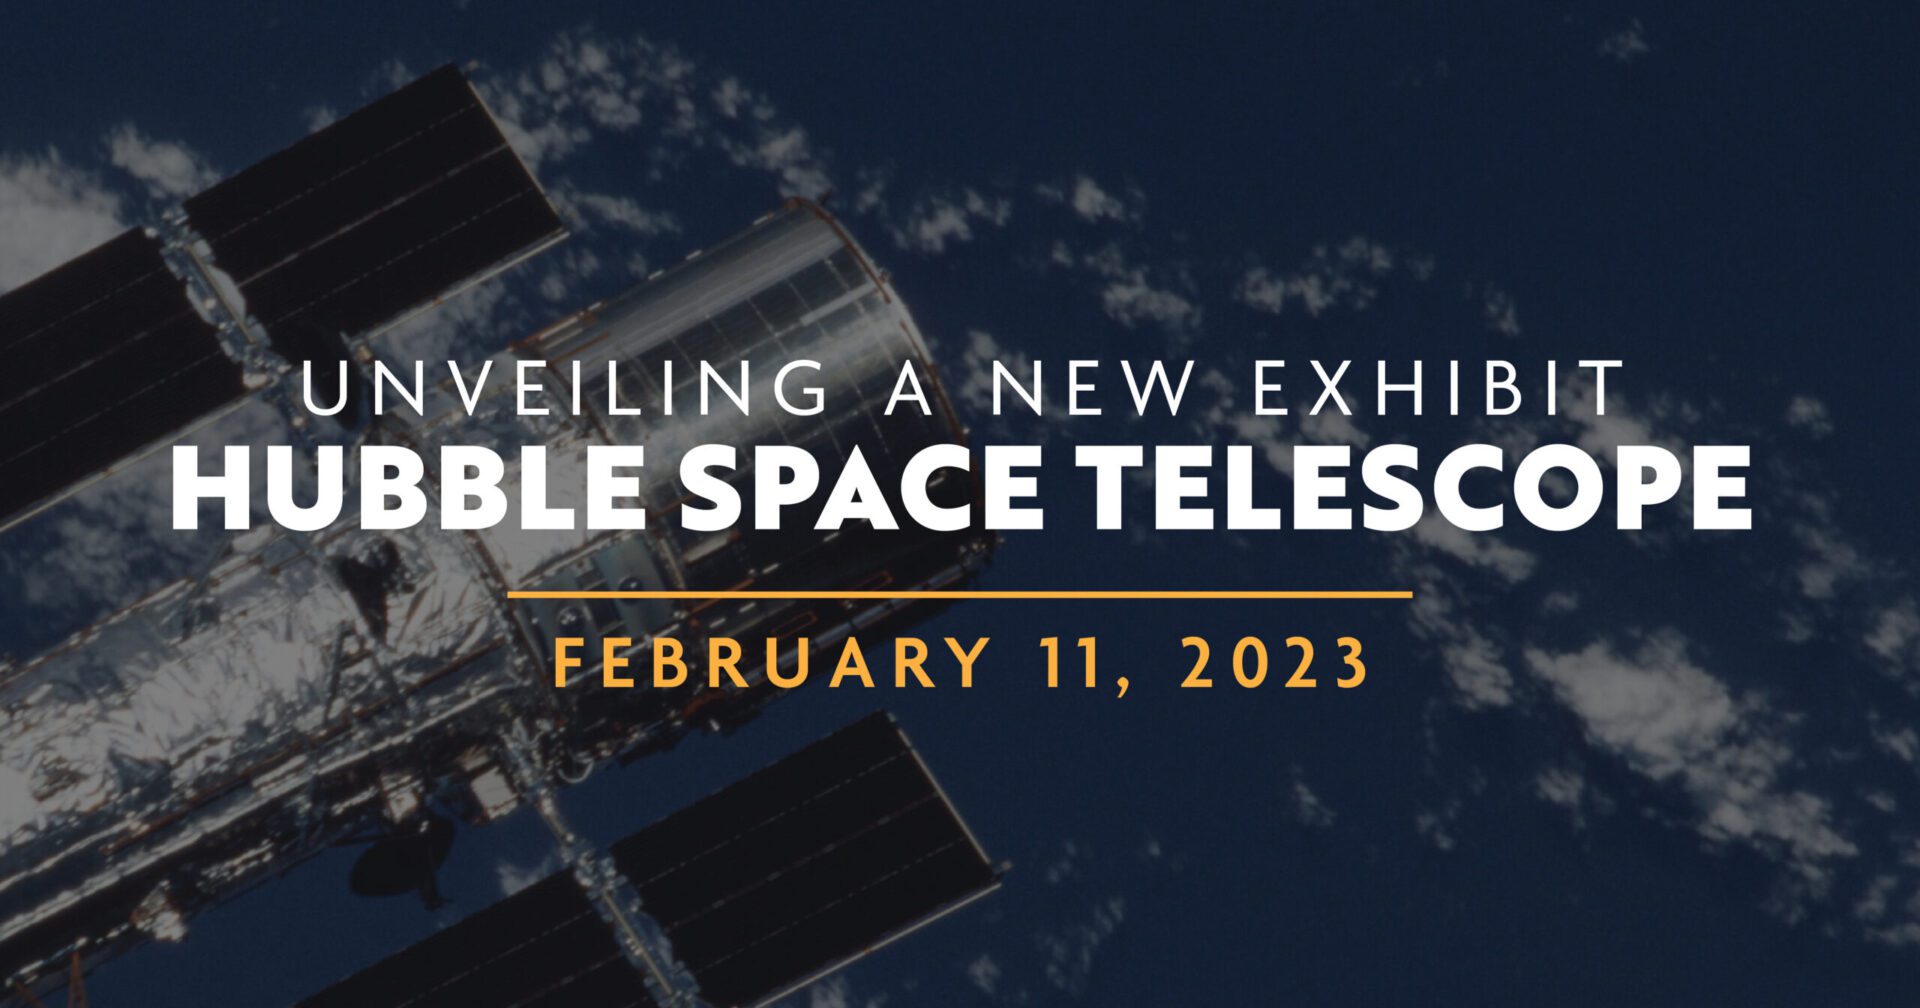 Unveiling a new exhibit hubble space telescope february 11, 2013.